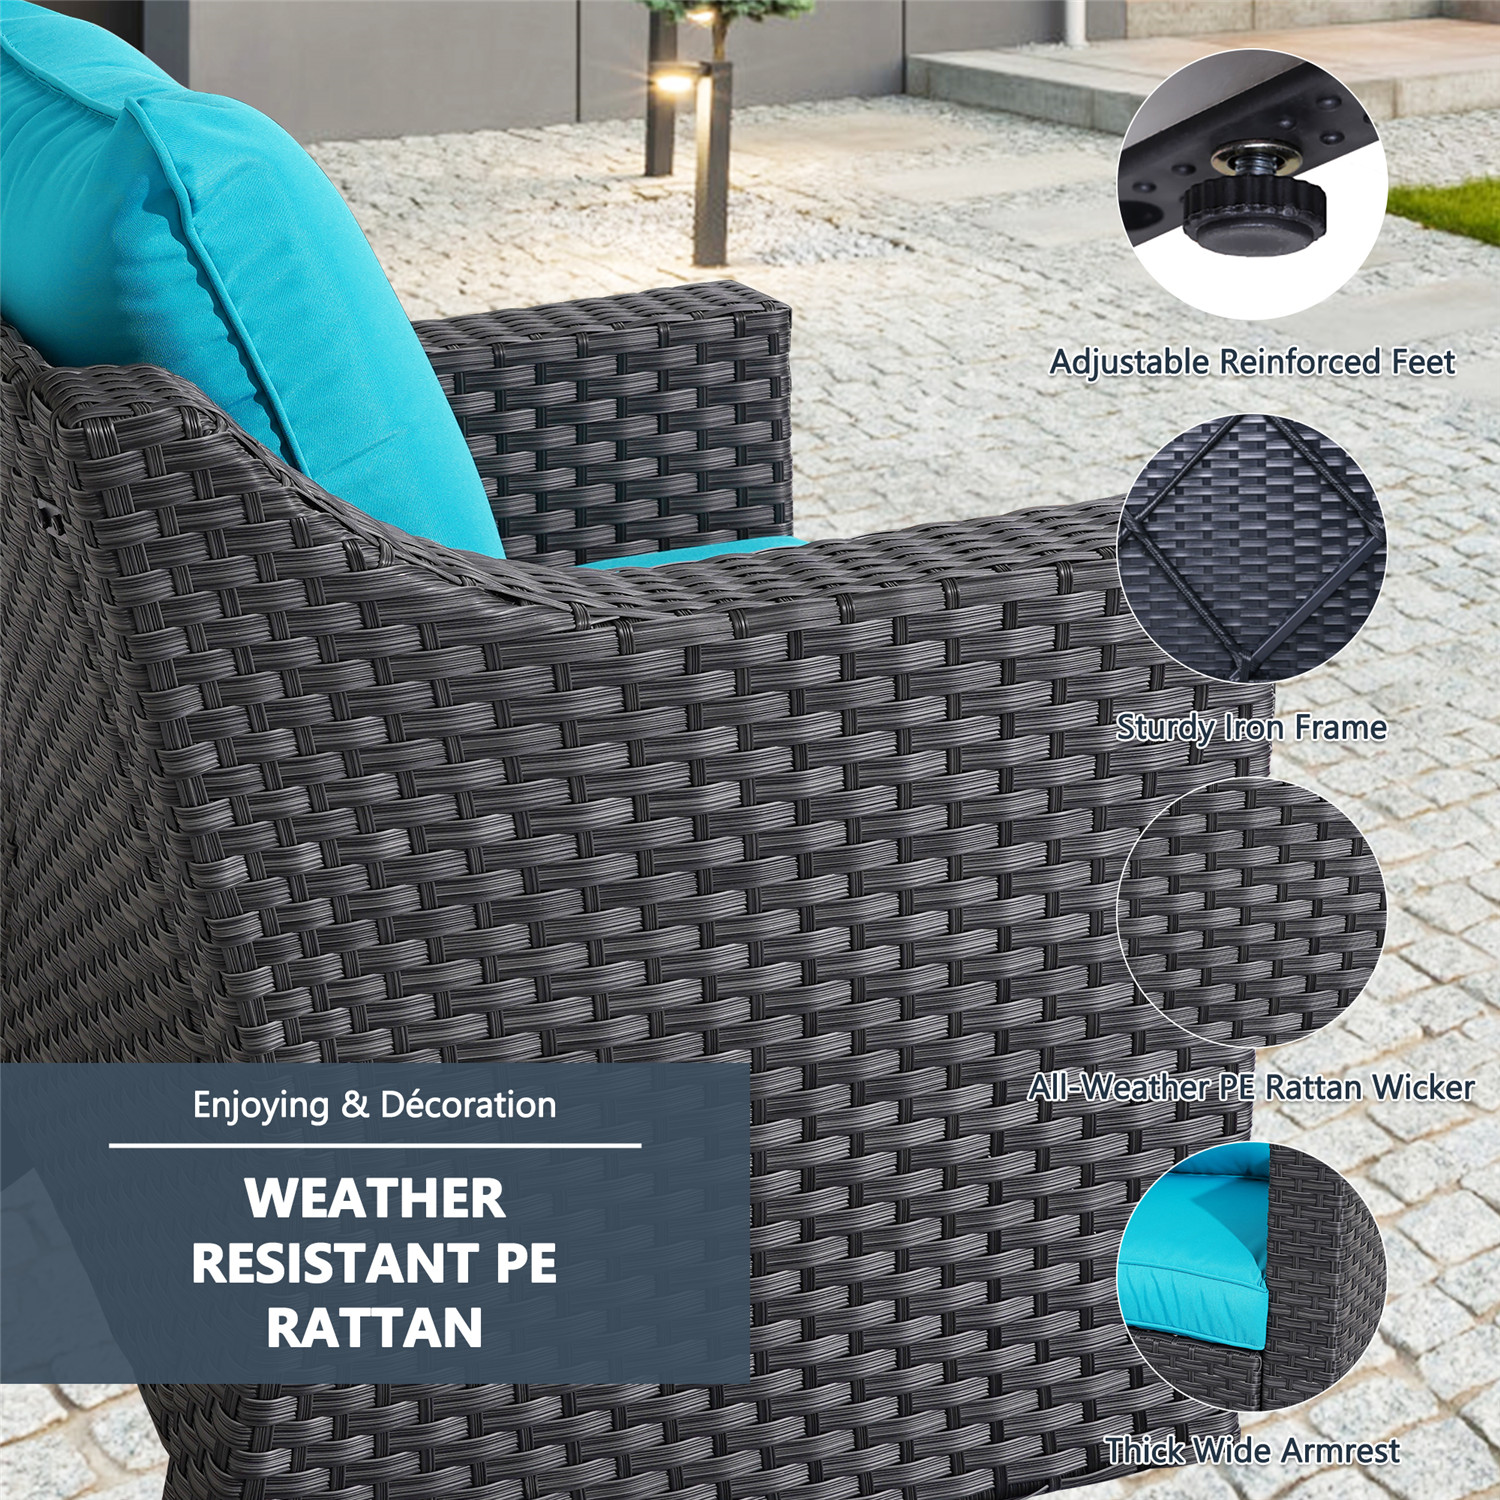 Superjoe 5 Pcs Outdoor Patio Furniture Set All Weather PE Rattan Wicker Chairs with Ottomans and Side Table,Blue - image 5 of 7